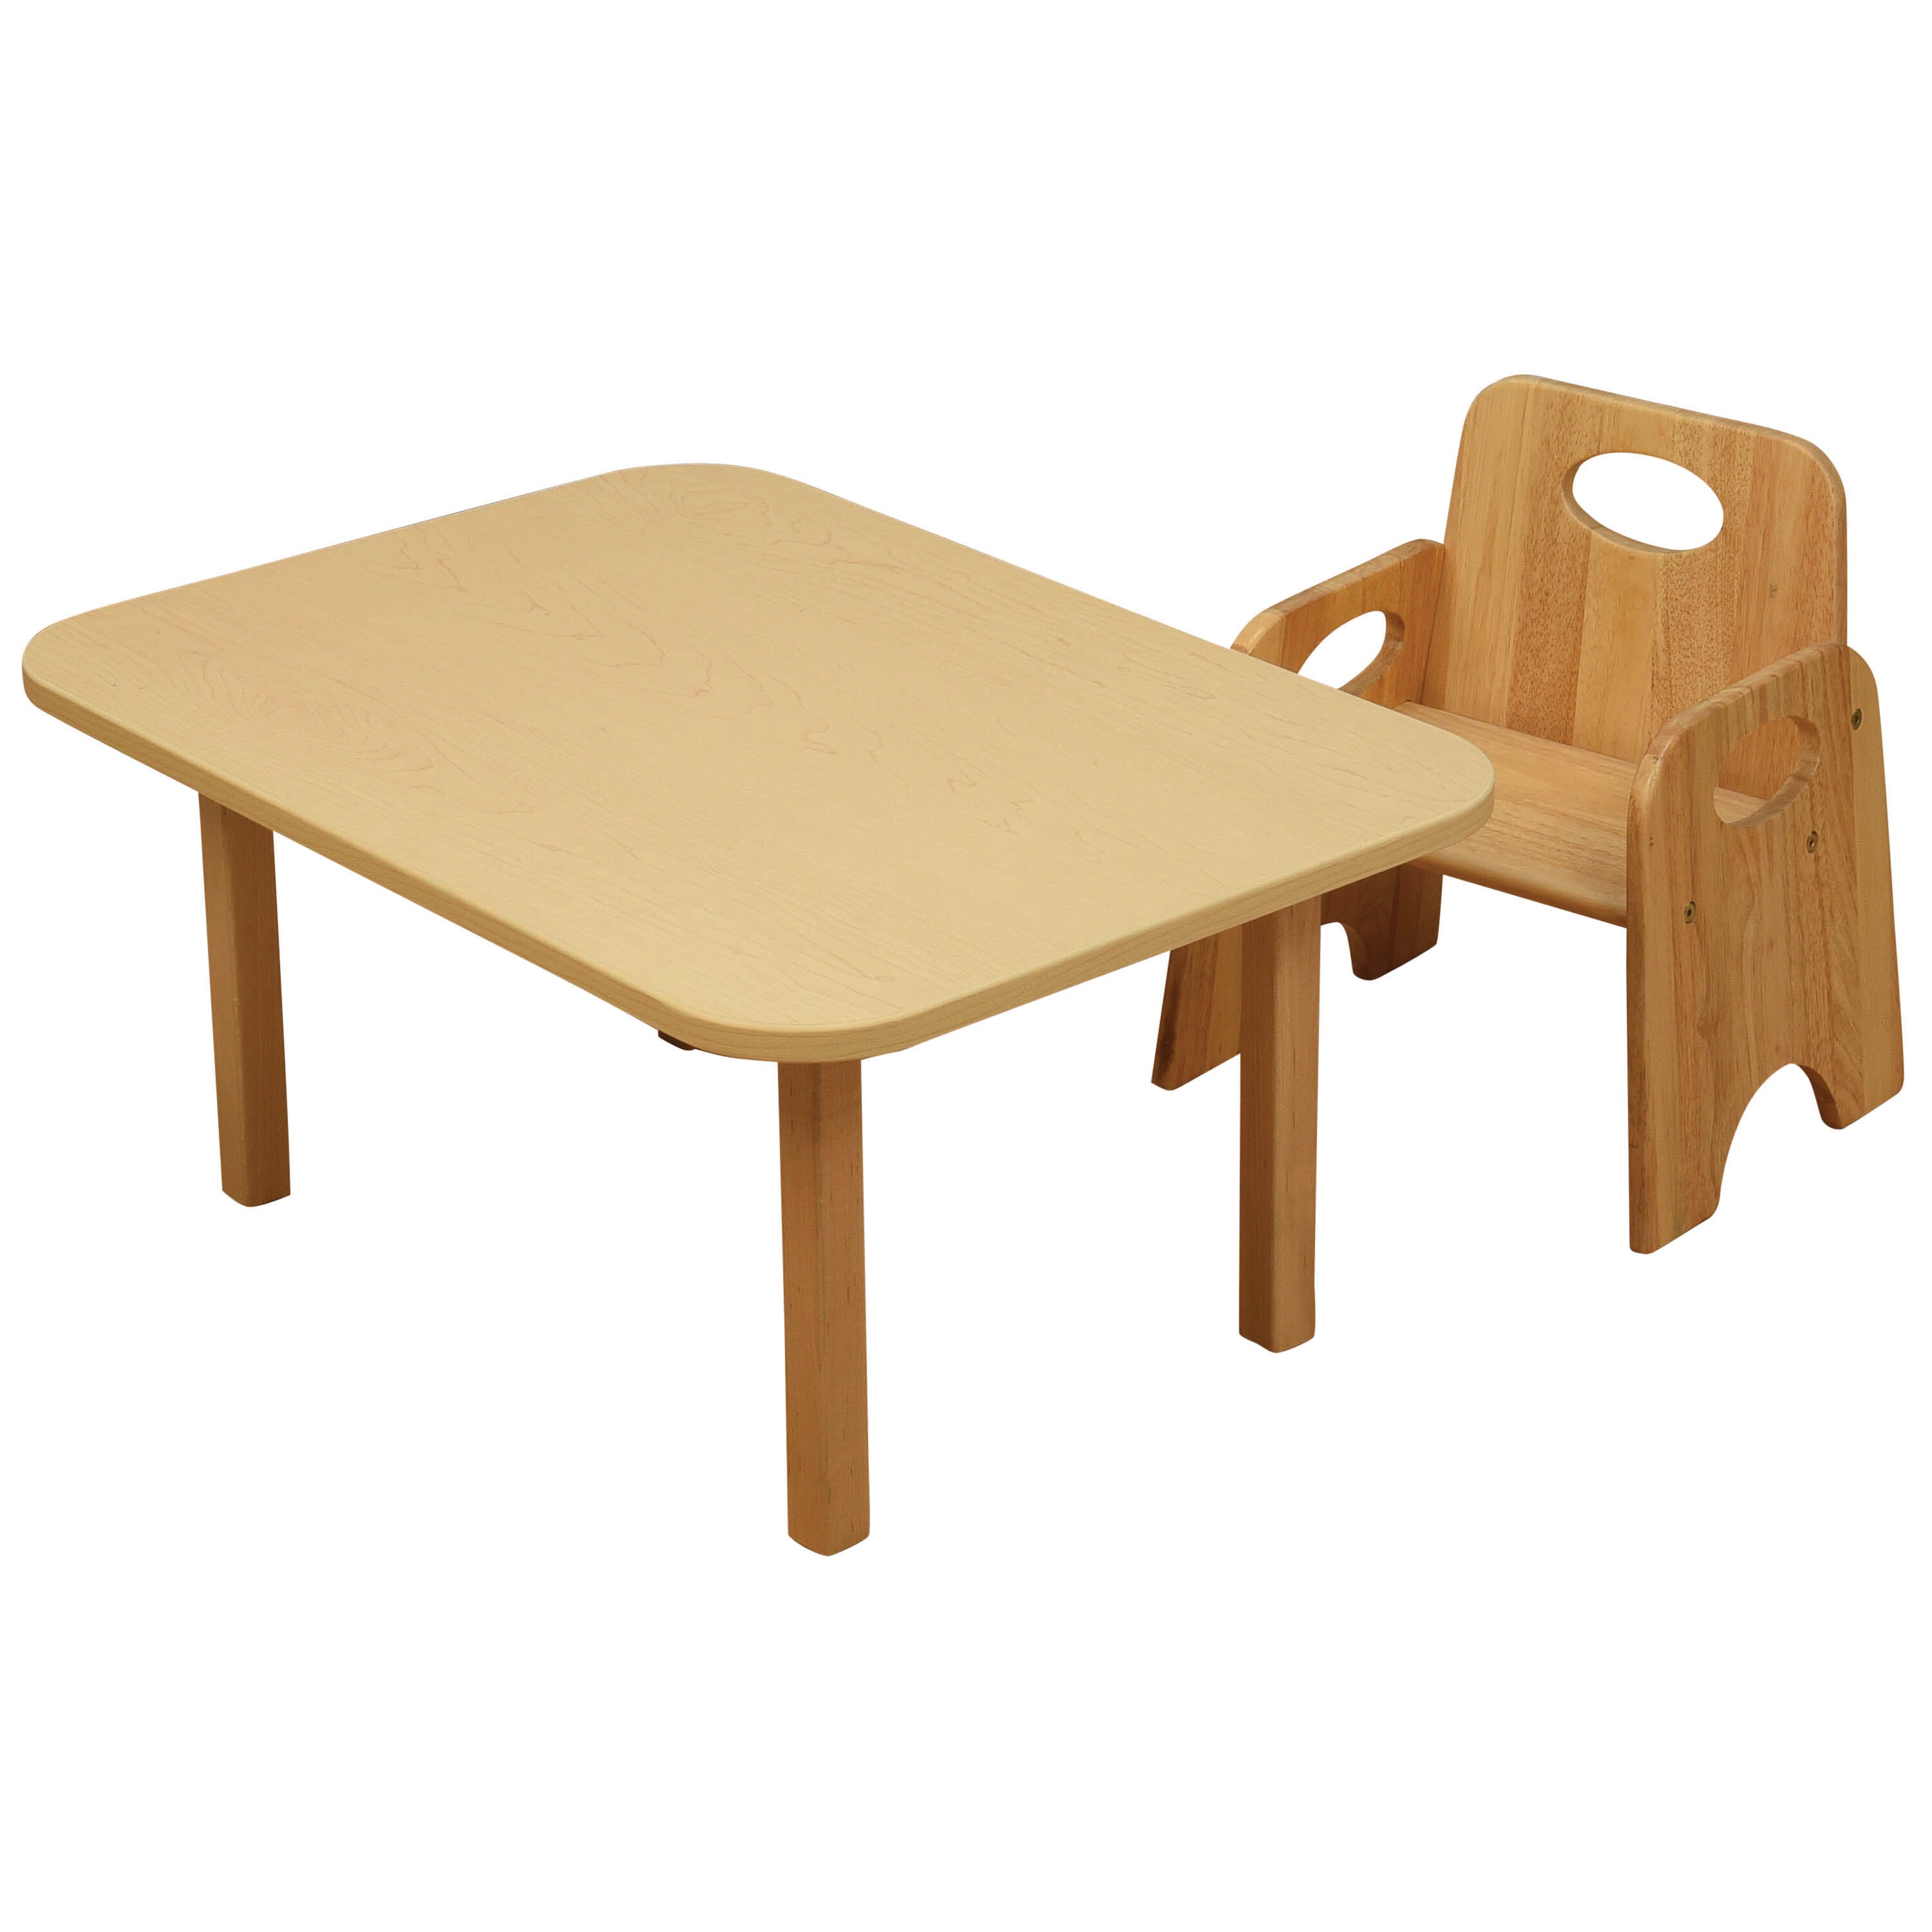 Classic Toddler Chair 6" High